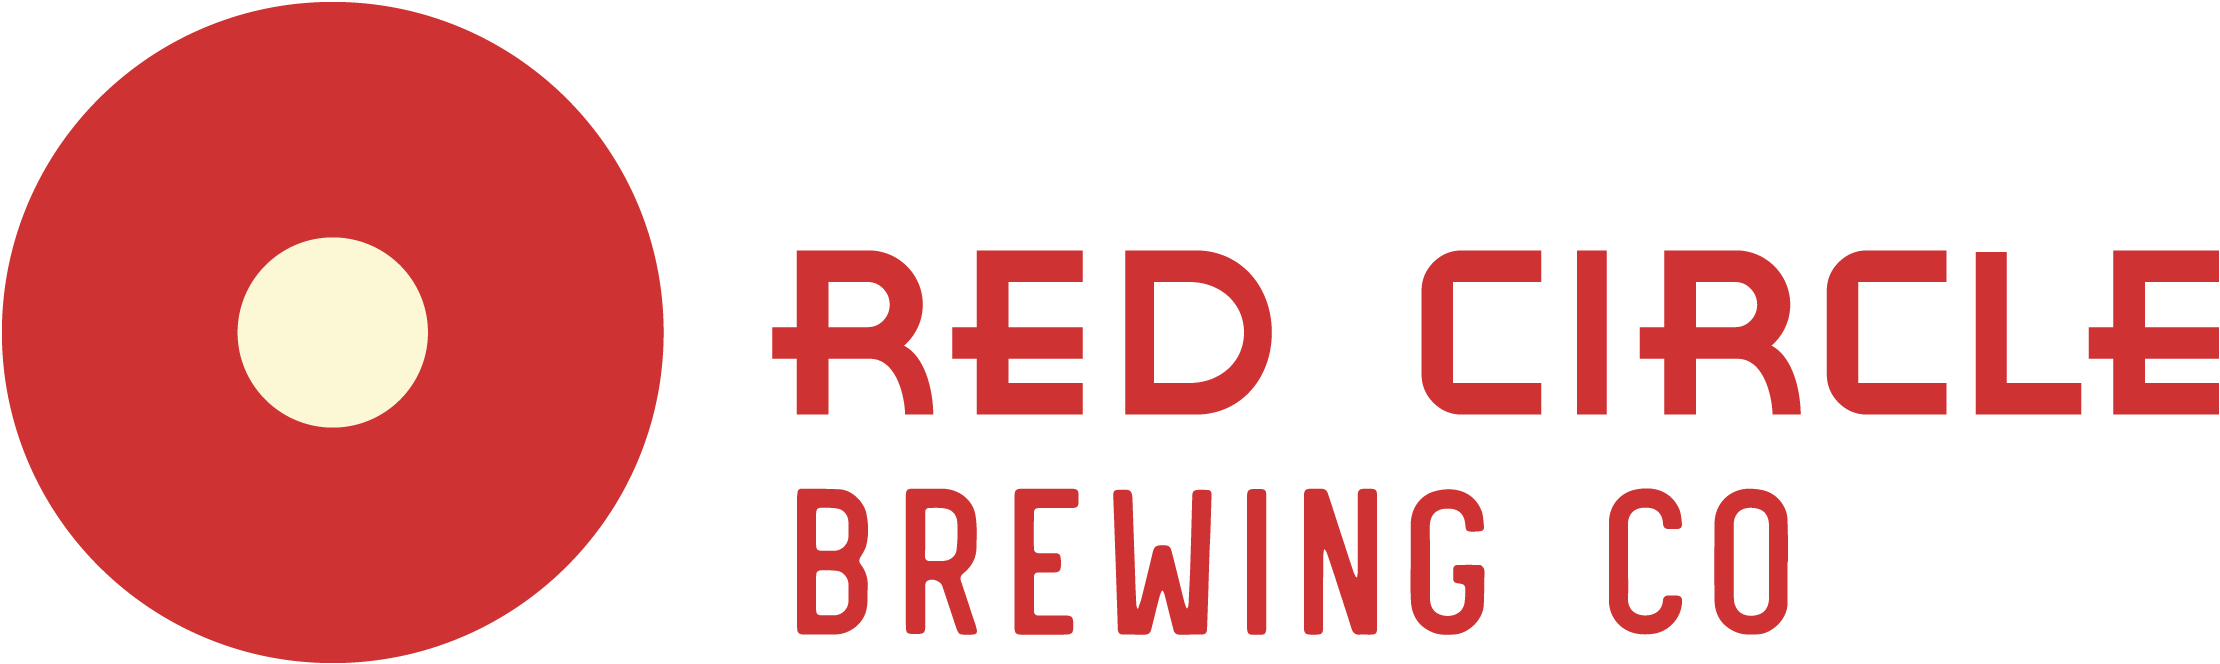 Red Circle Brand Logo - Red Circle Brewing Co. | About